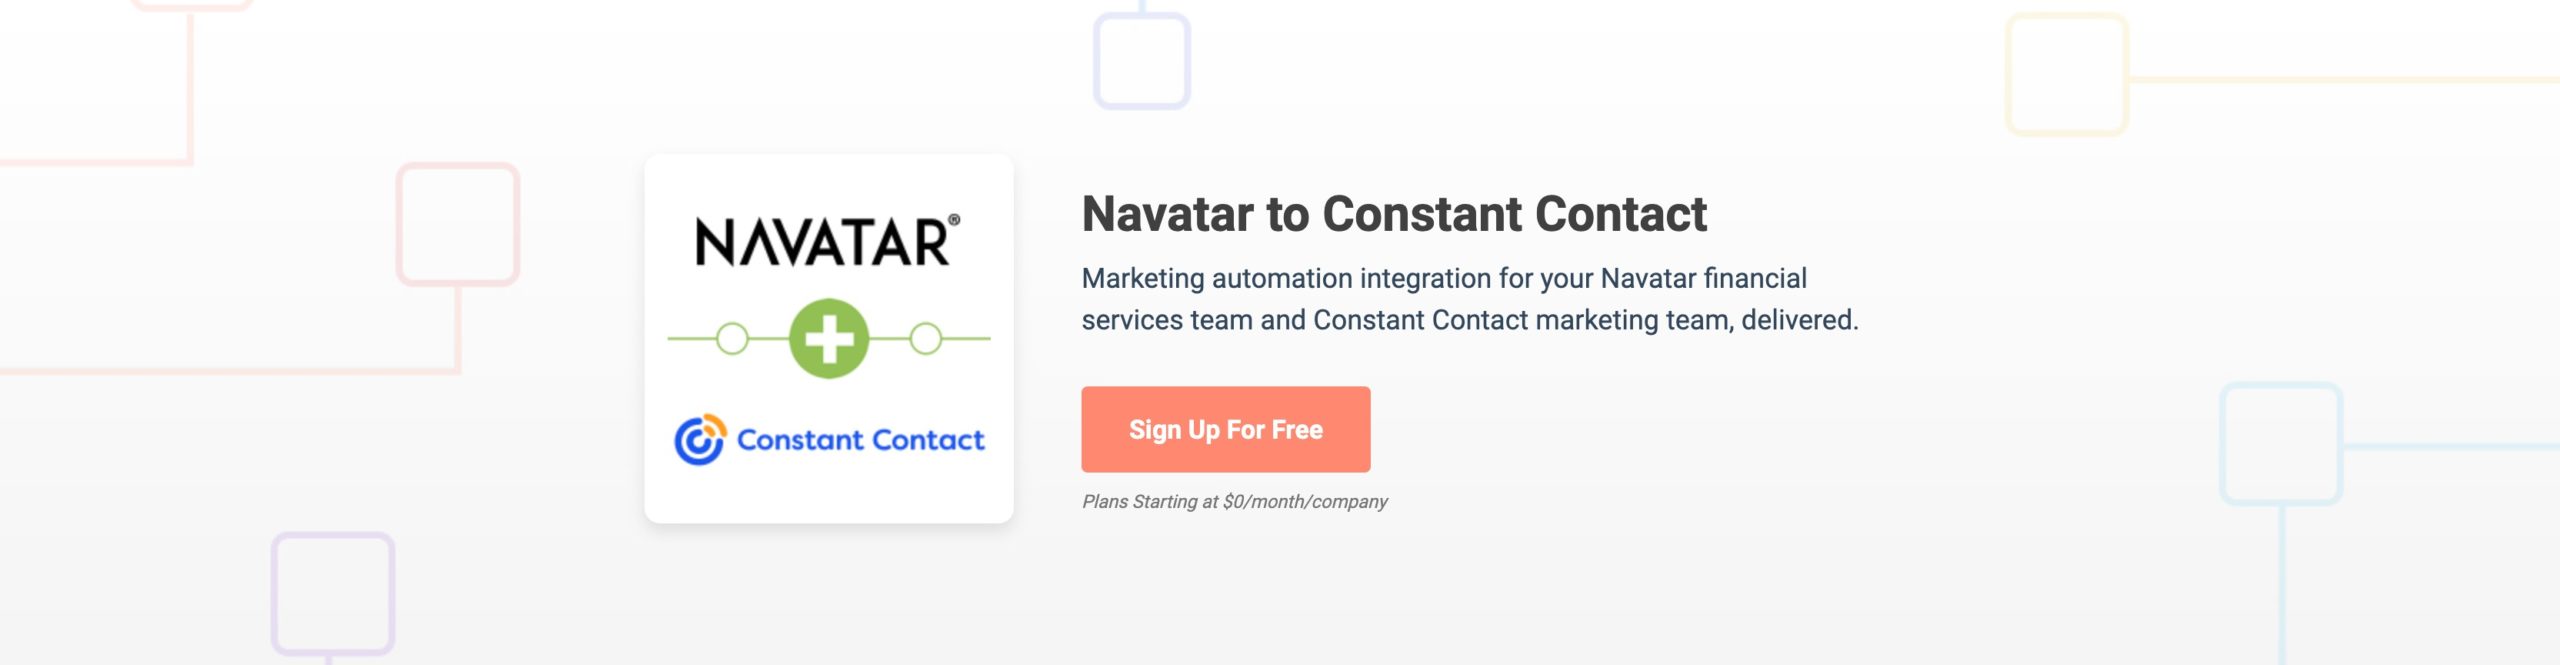 Navatar to Constant Contact